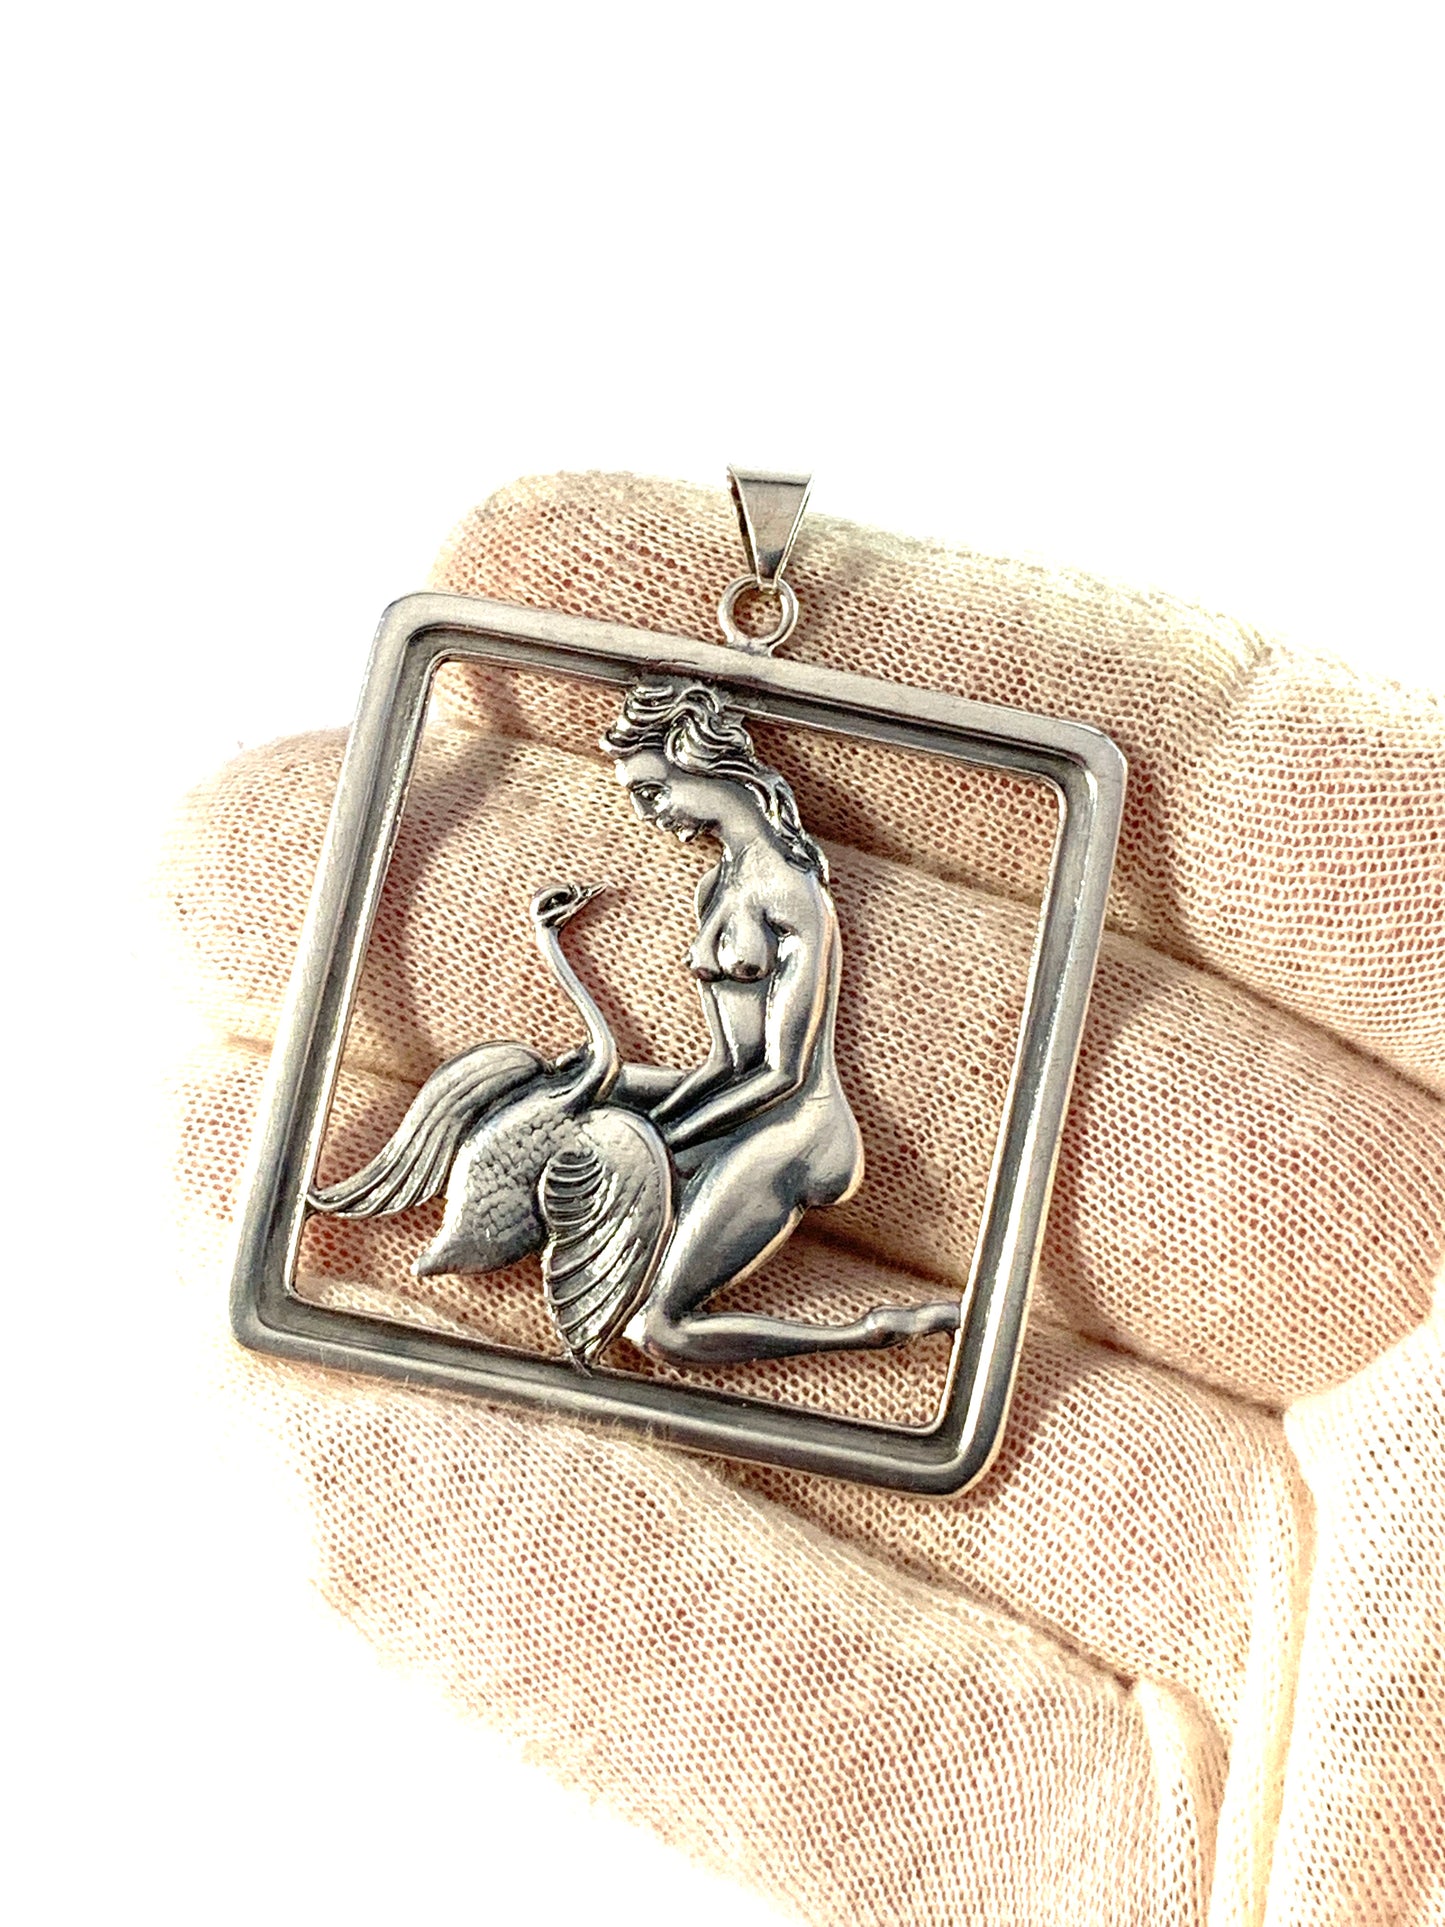 Denmark 1940s. Large Solid Silver Pendant.